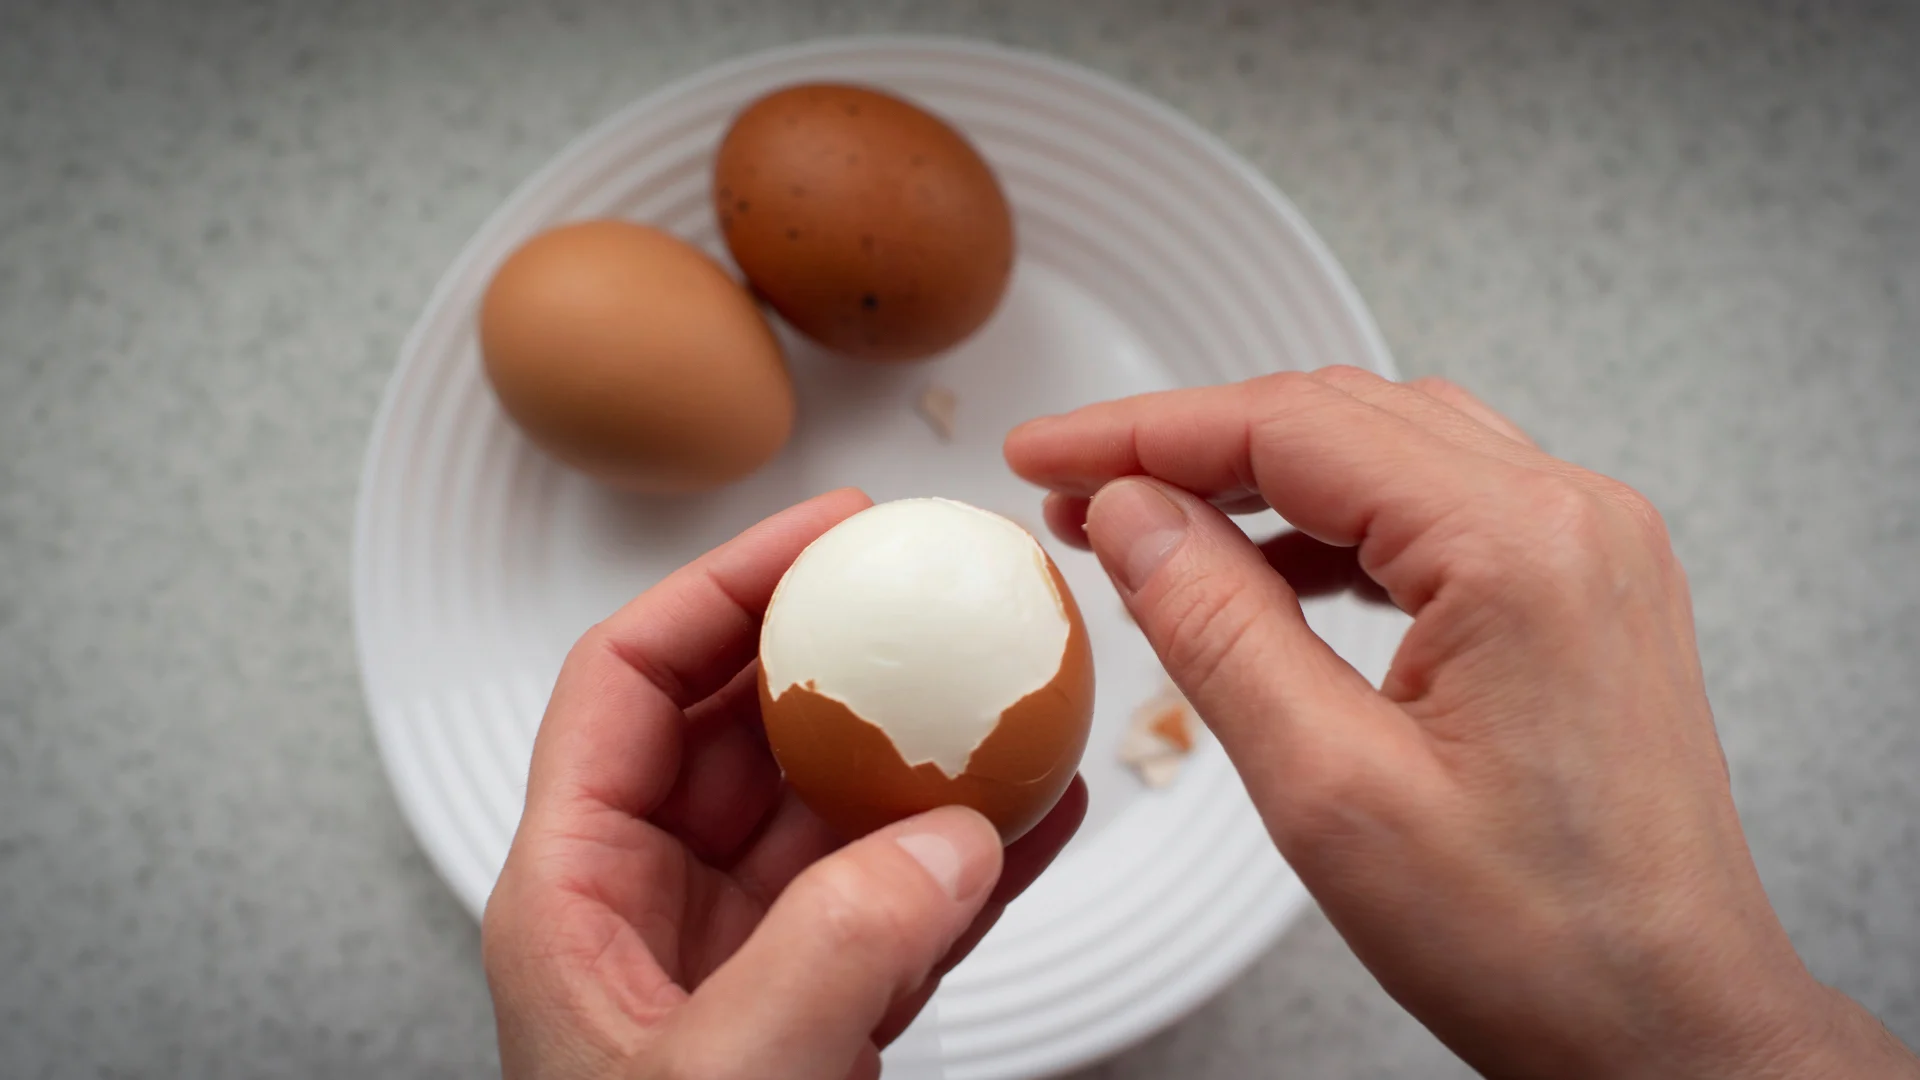 One hand is holding a hard-boiled egg, while the other peels it.